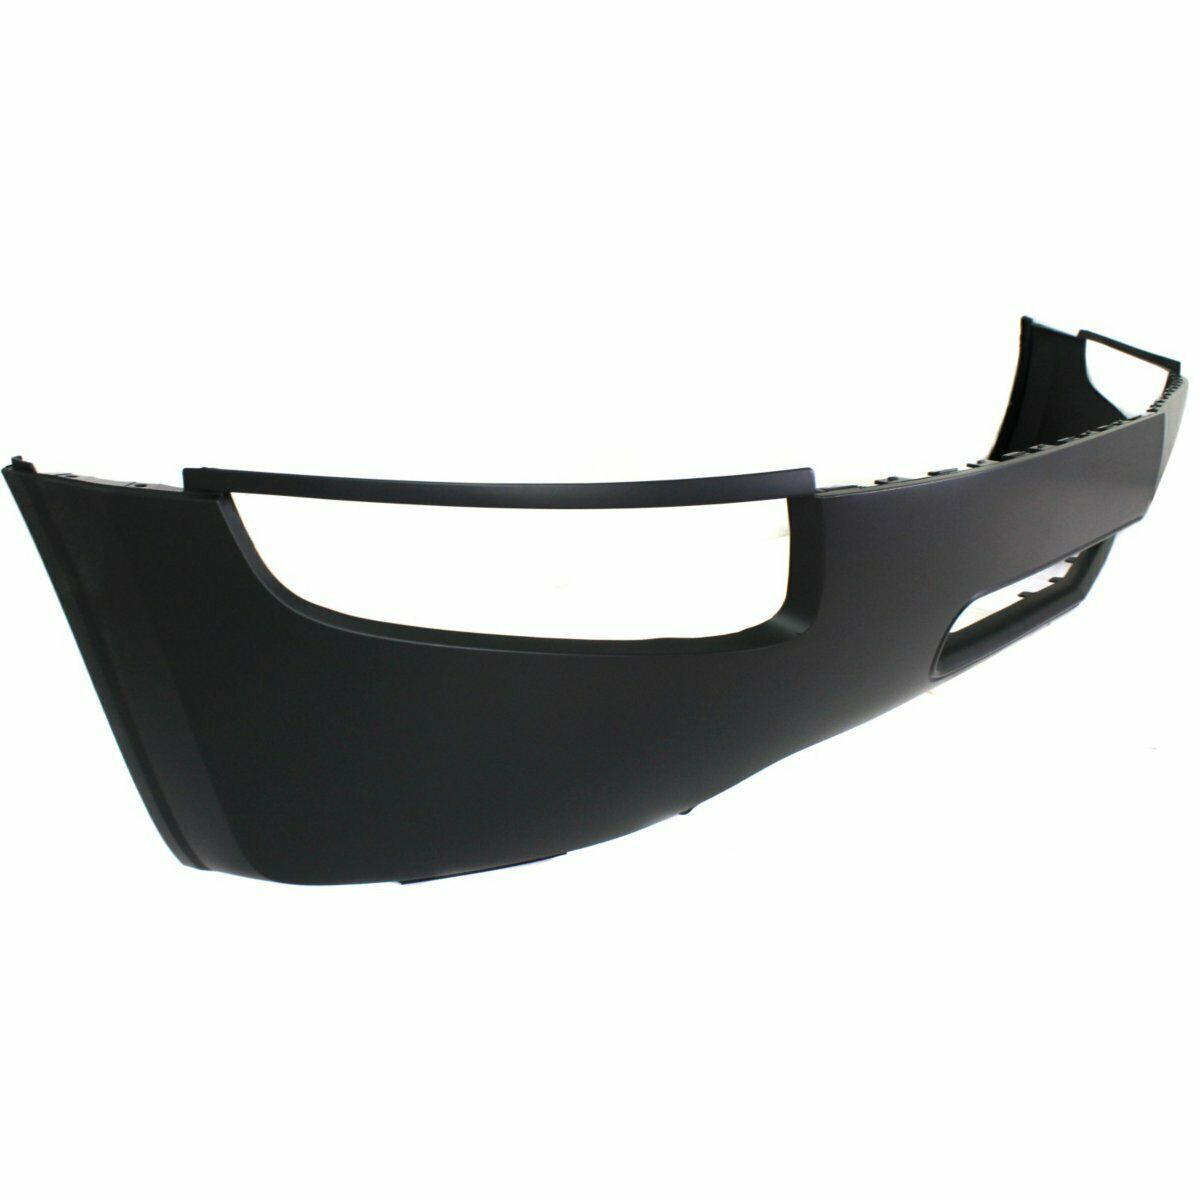 2008-2012 Buick Enclave Front Lower Bumper Painted to Match